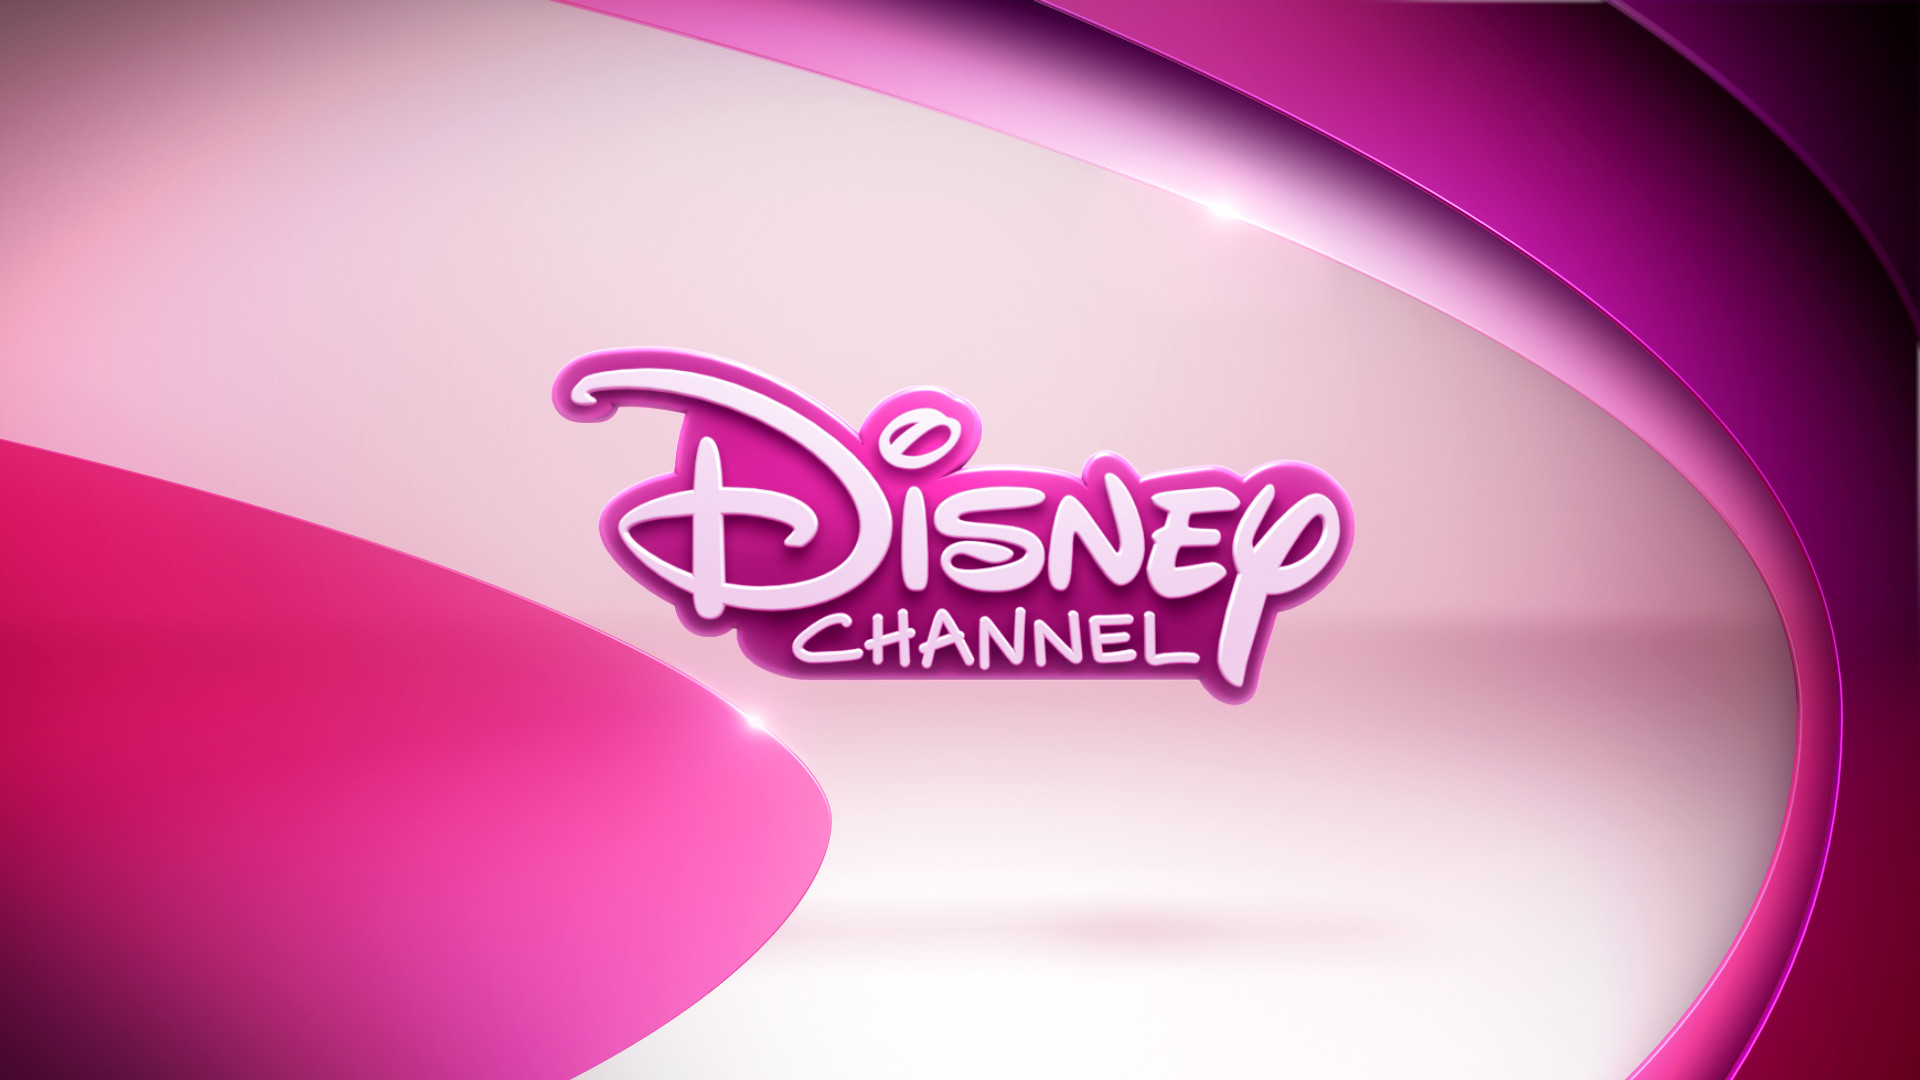 Disney Channel Backgrounds by Shila Canova on NMgnCP PC Gallery